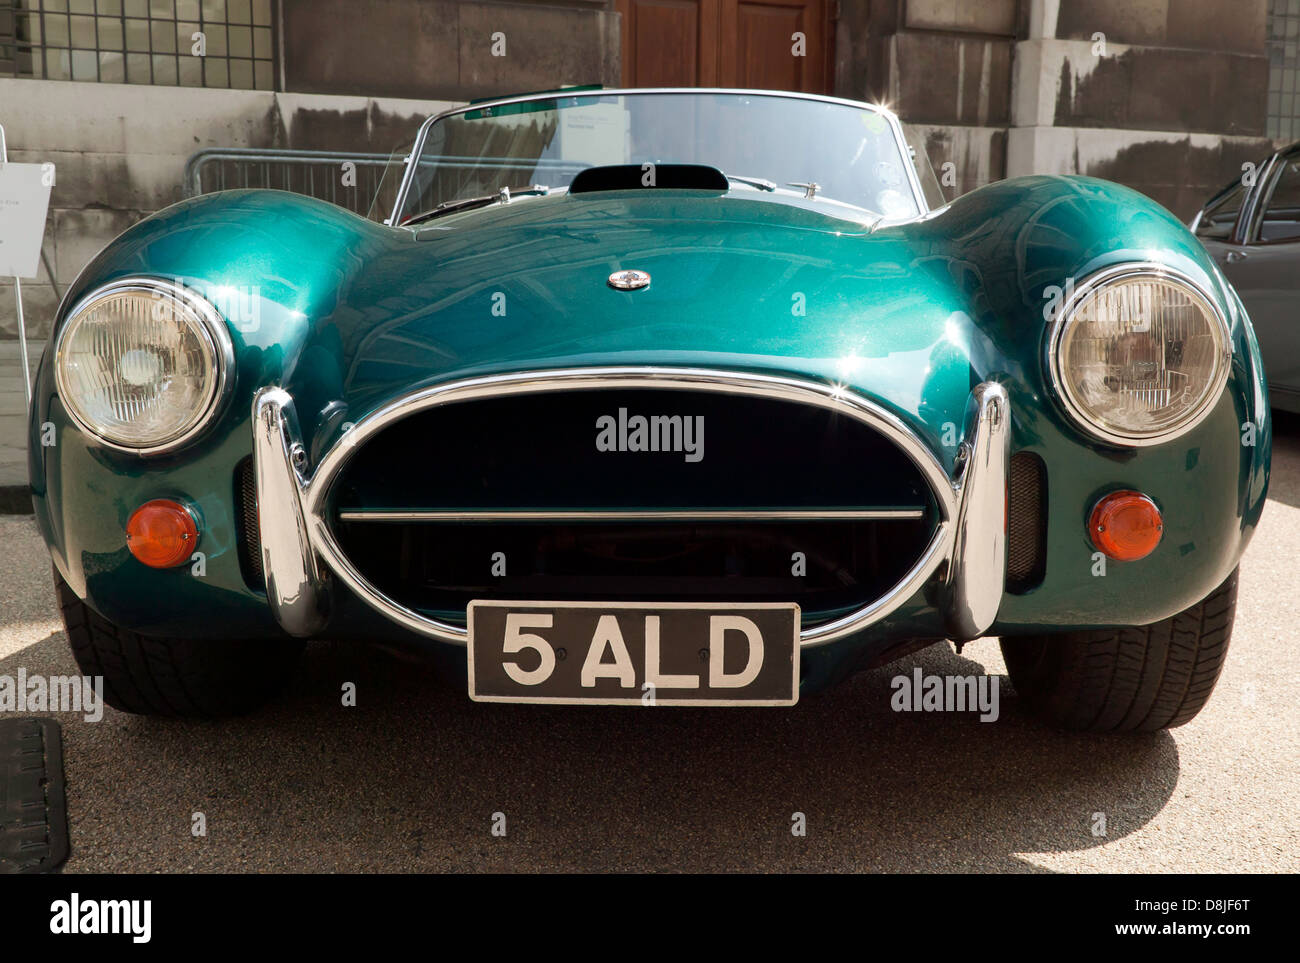 Front View Of A Classic 427 Ford Shelby Ac Cobra On Display At The Stock Photo Alamy